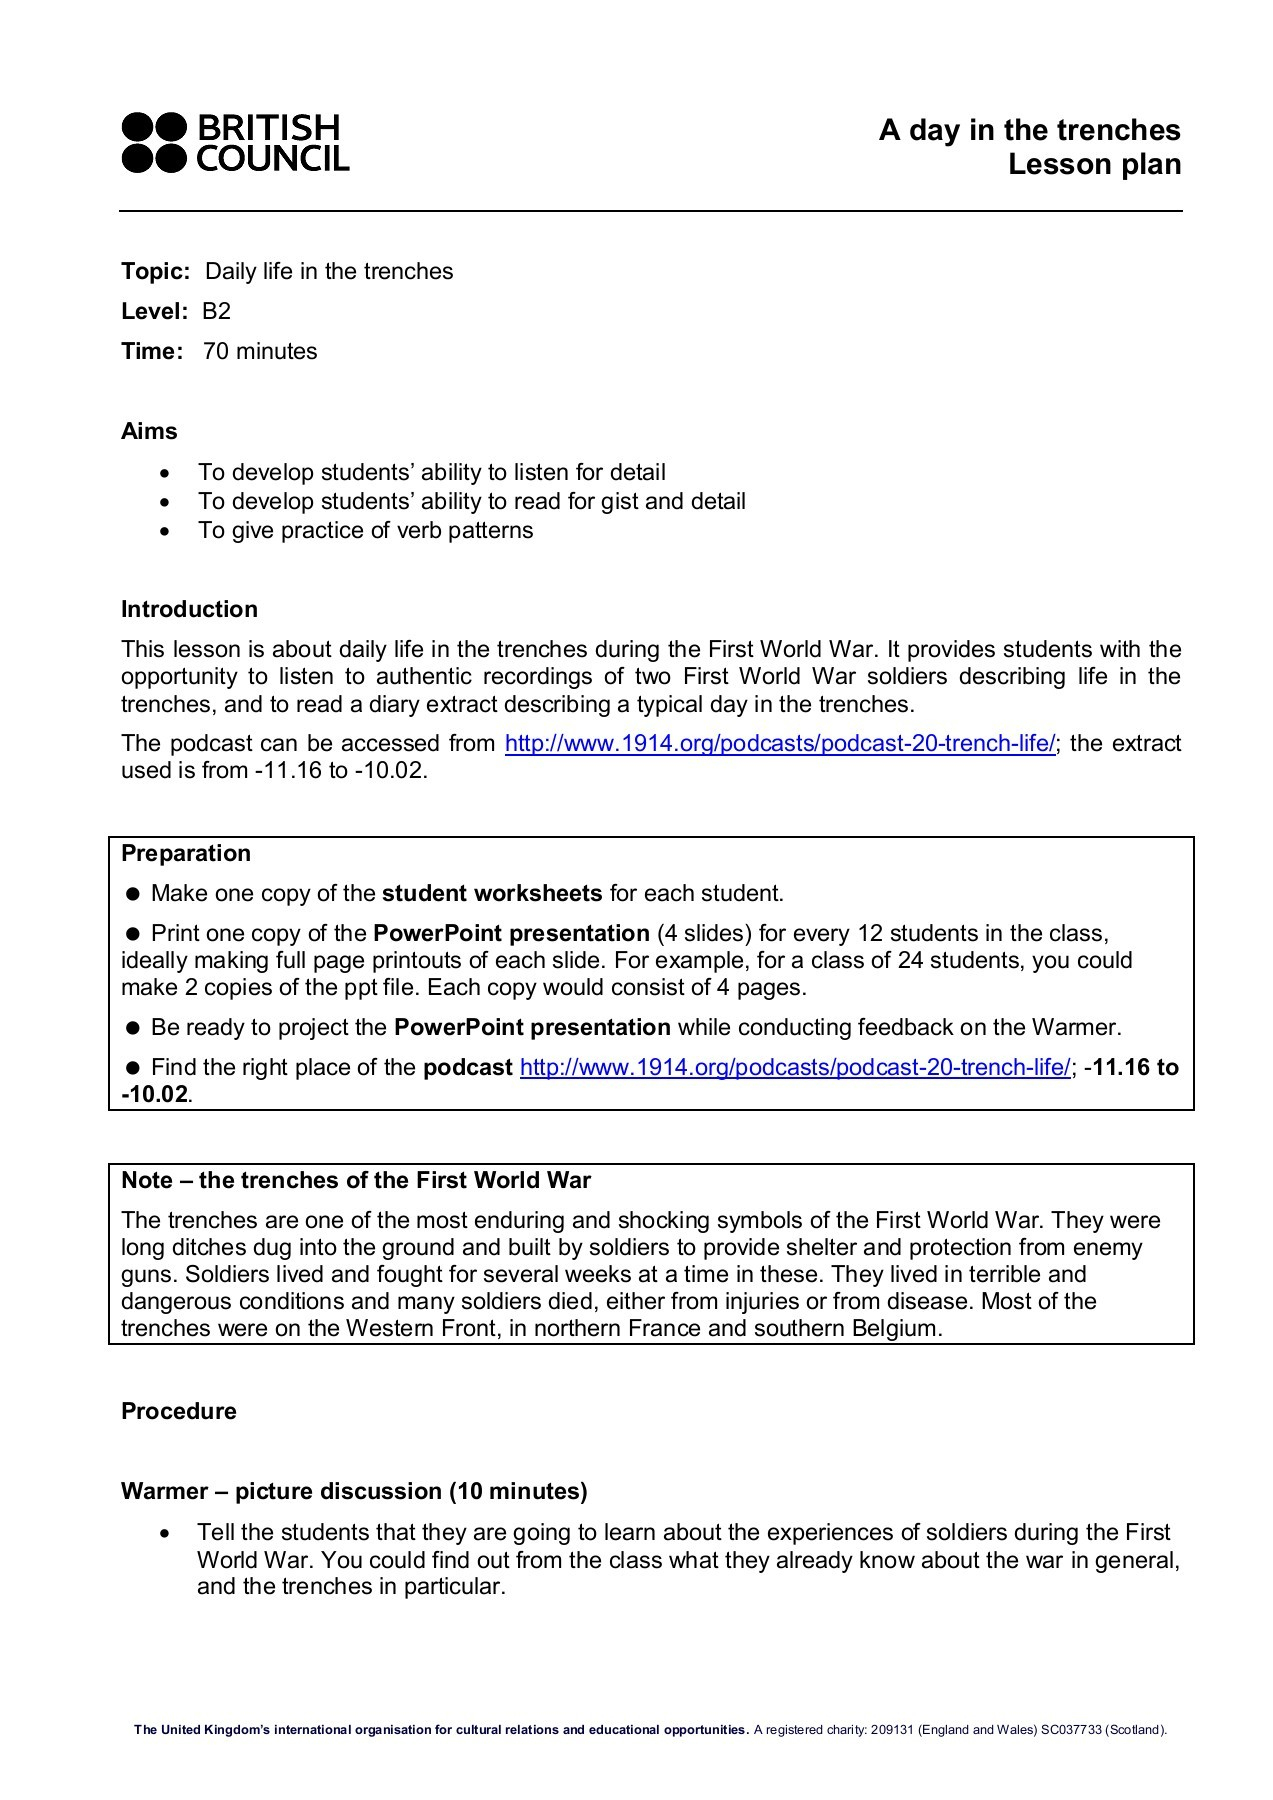 A Day In The Trenches Lesson Plan - British Council Pages 1